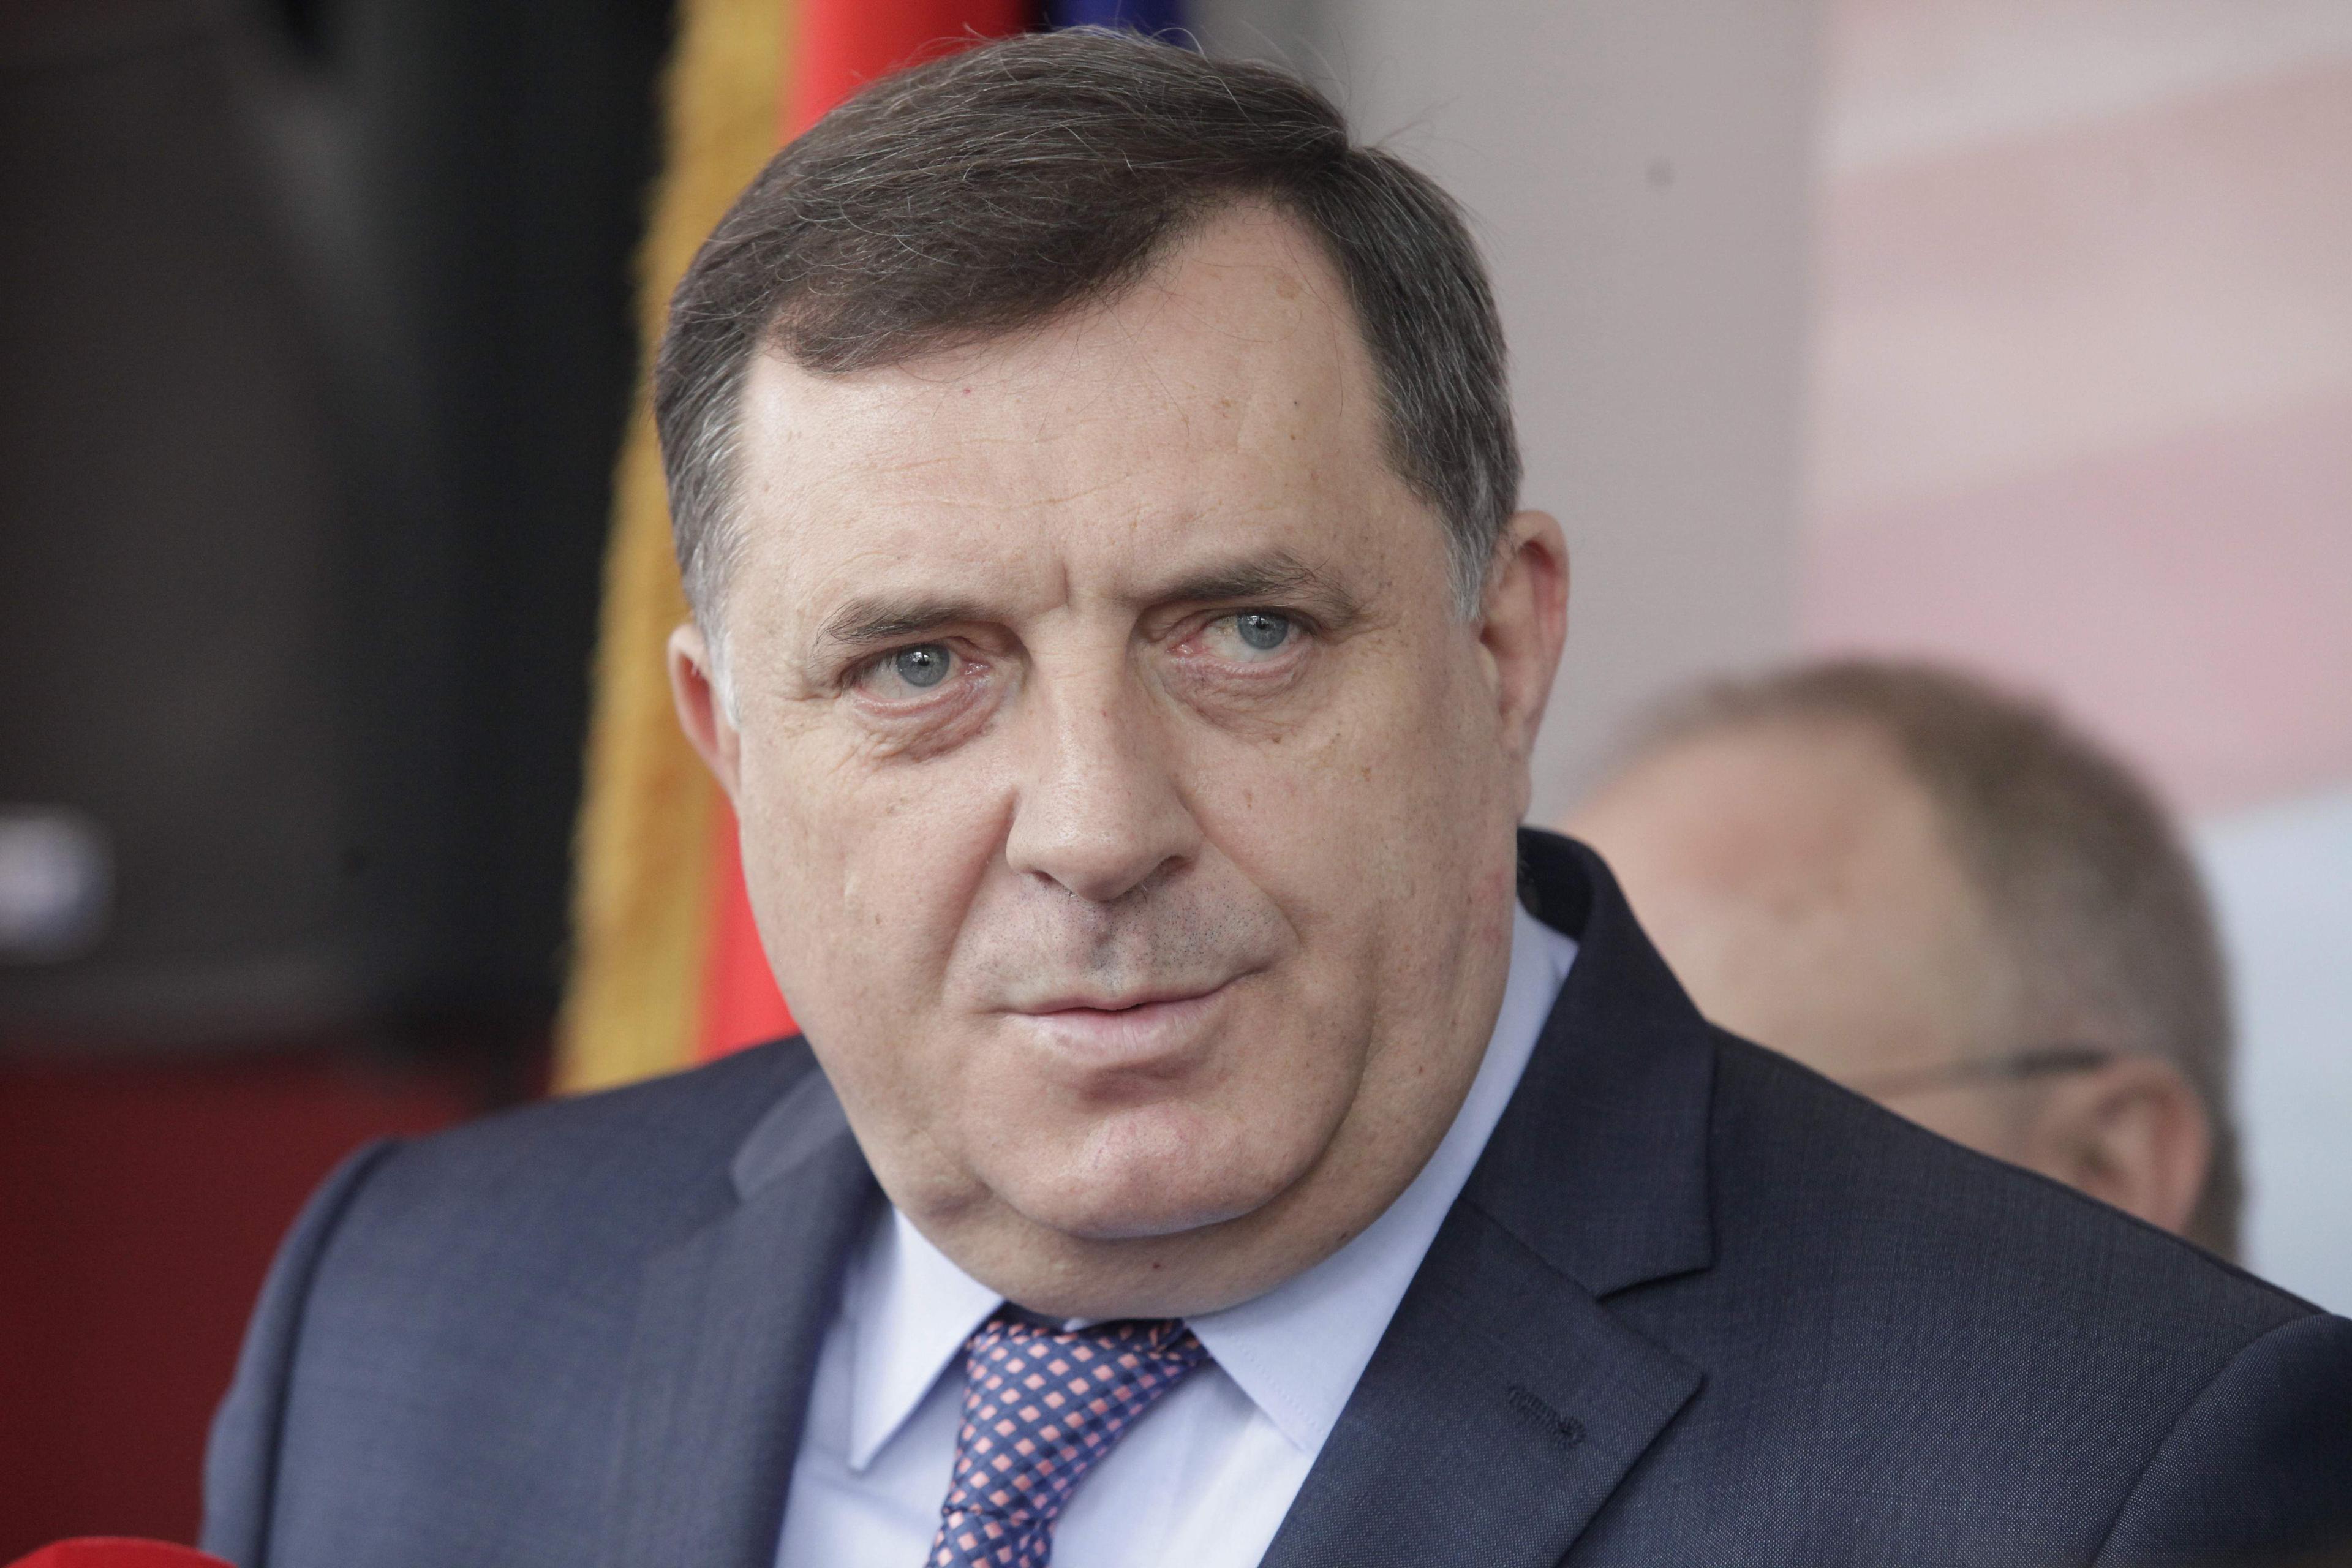 Dodik: Migrants who attack the population are scum, there will be no camps in RS